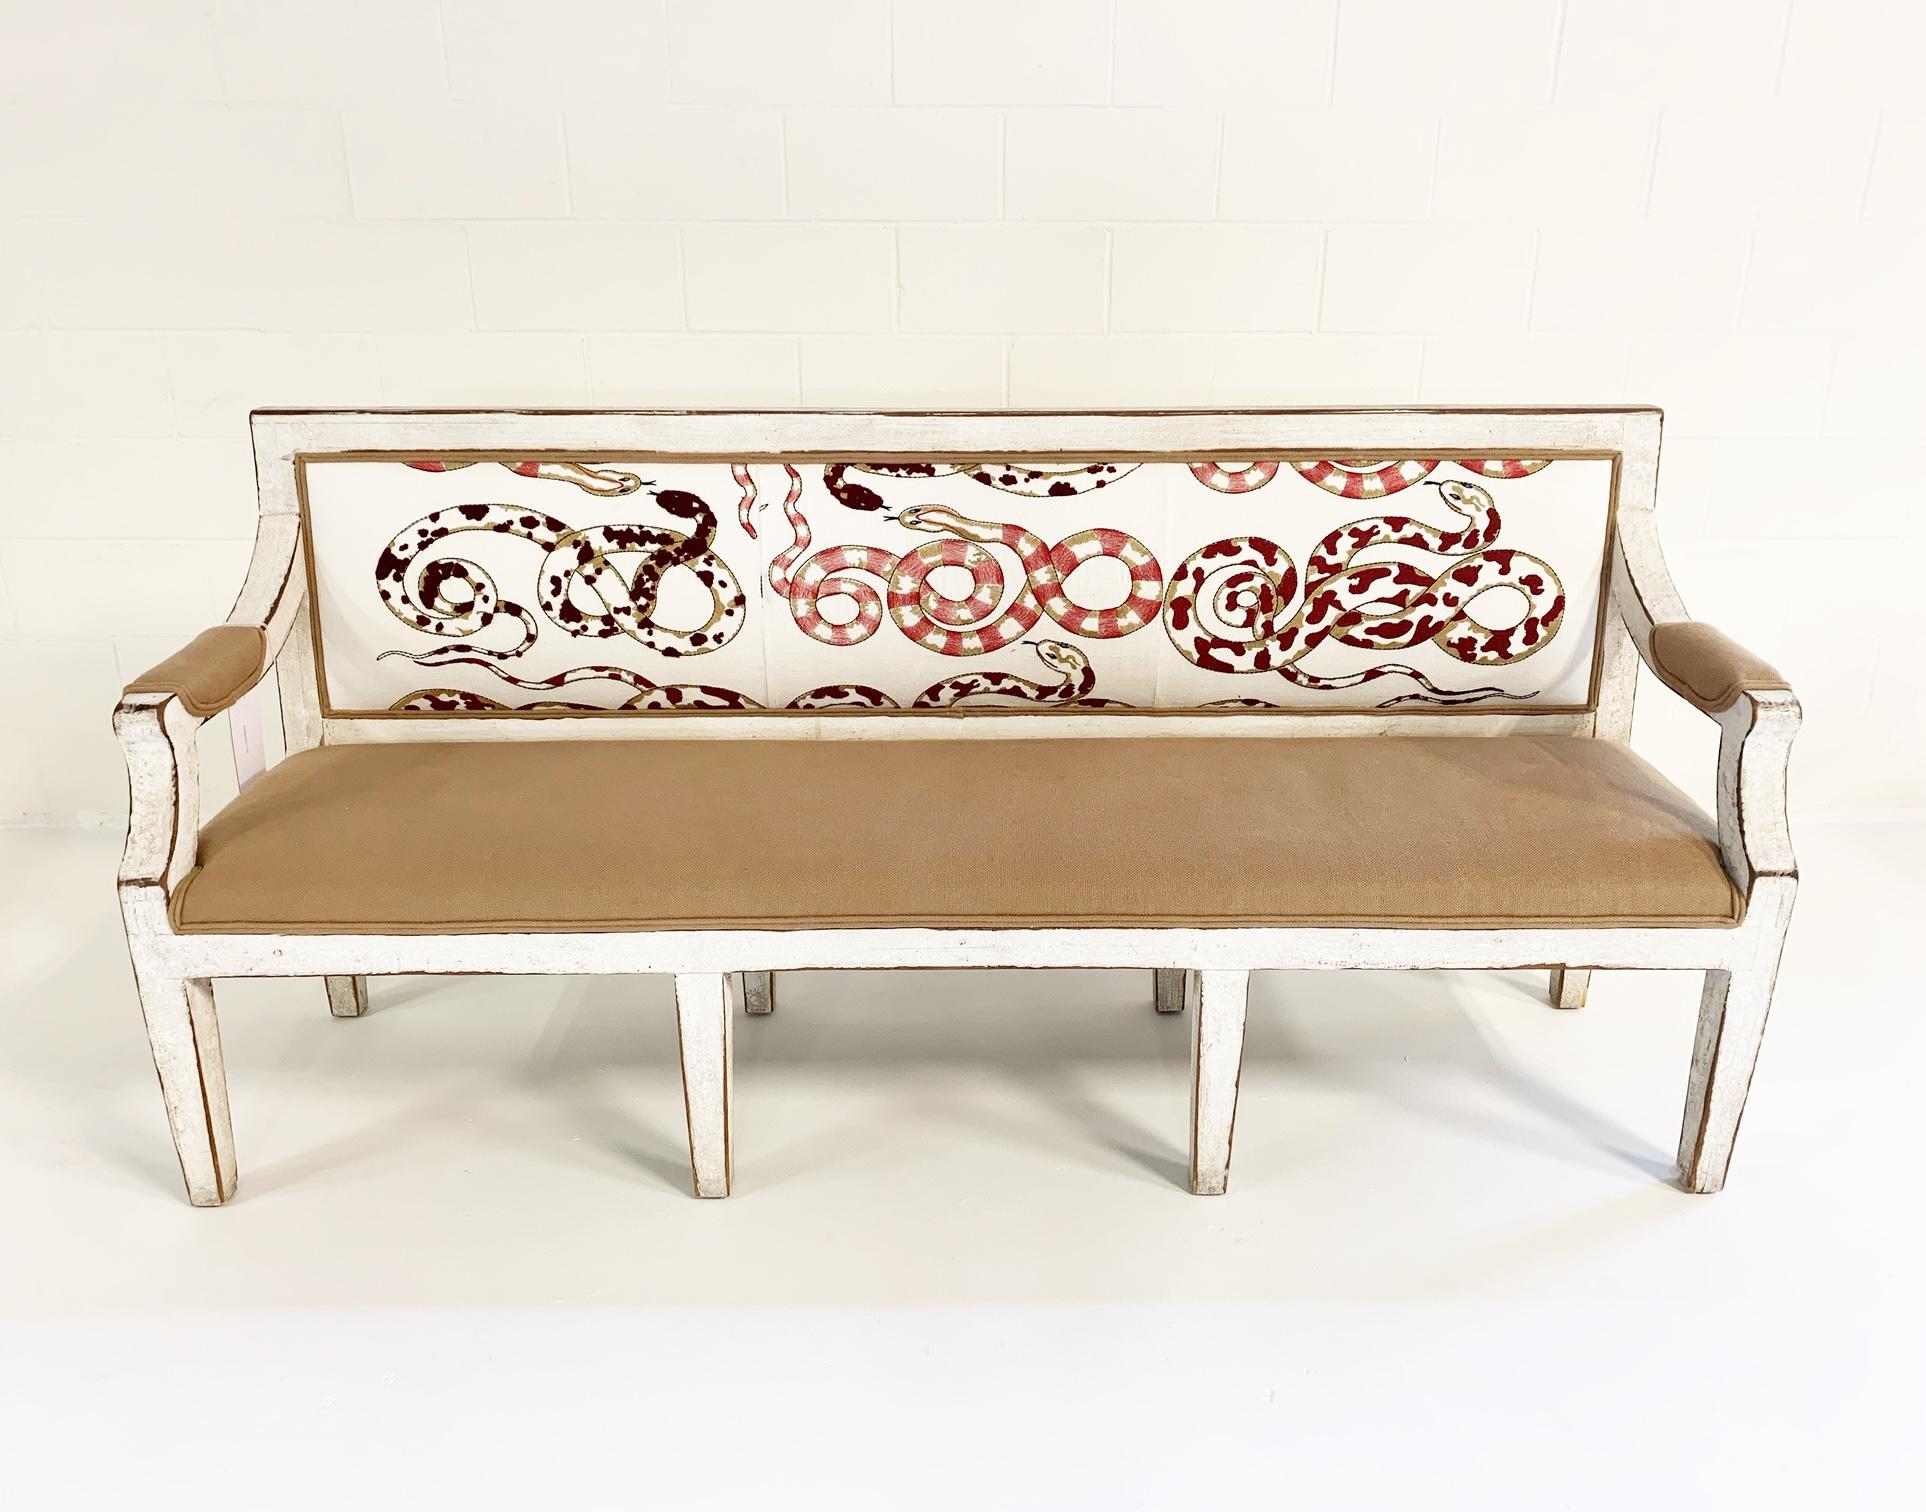 20th Century Swedish Neoclassical Style Settee in Pierre Frey and Loro Piana Linens